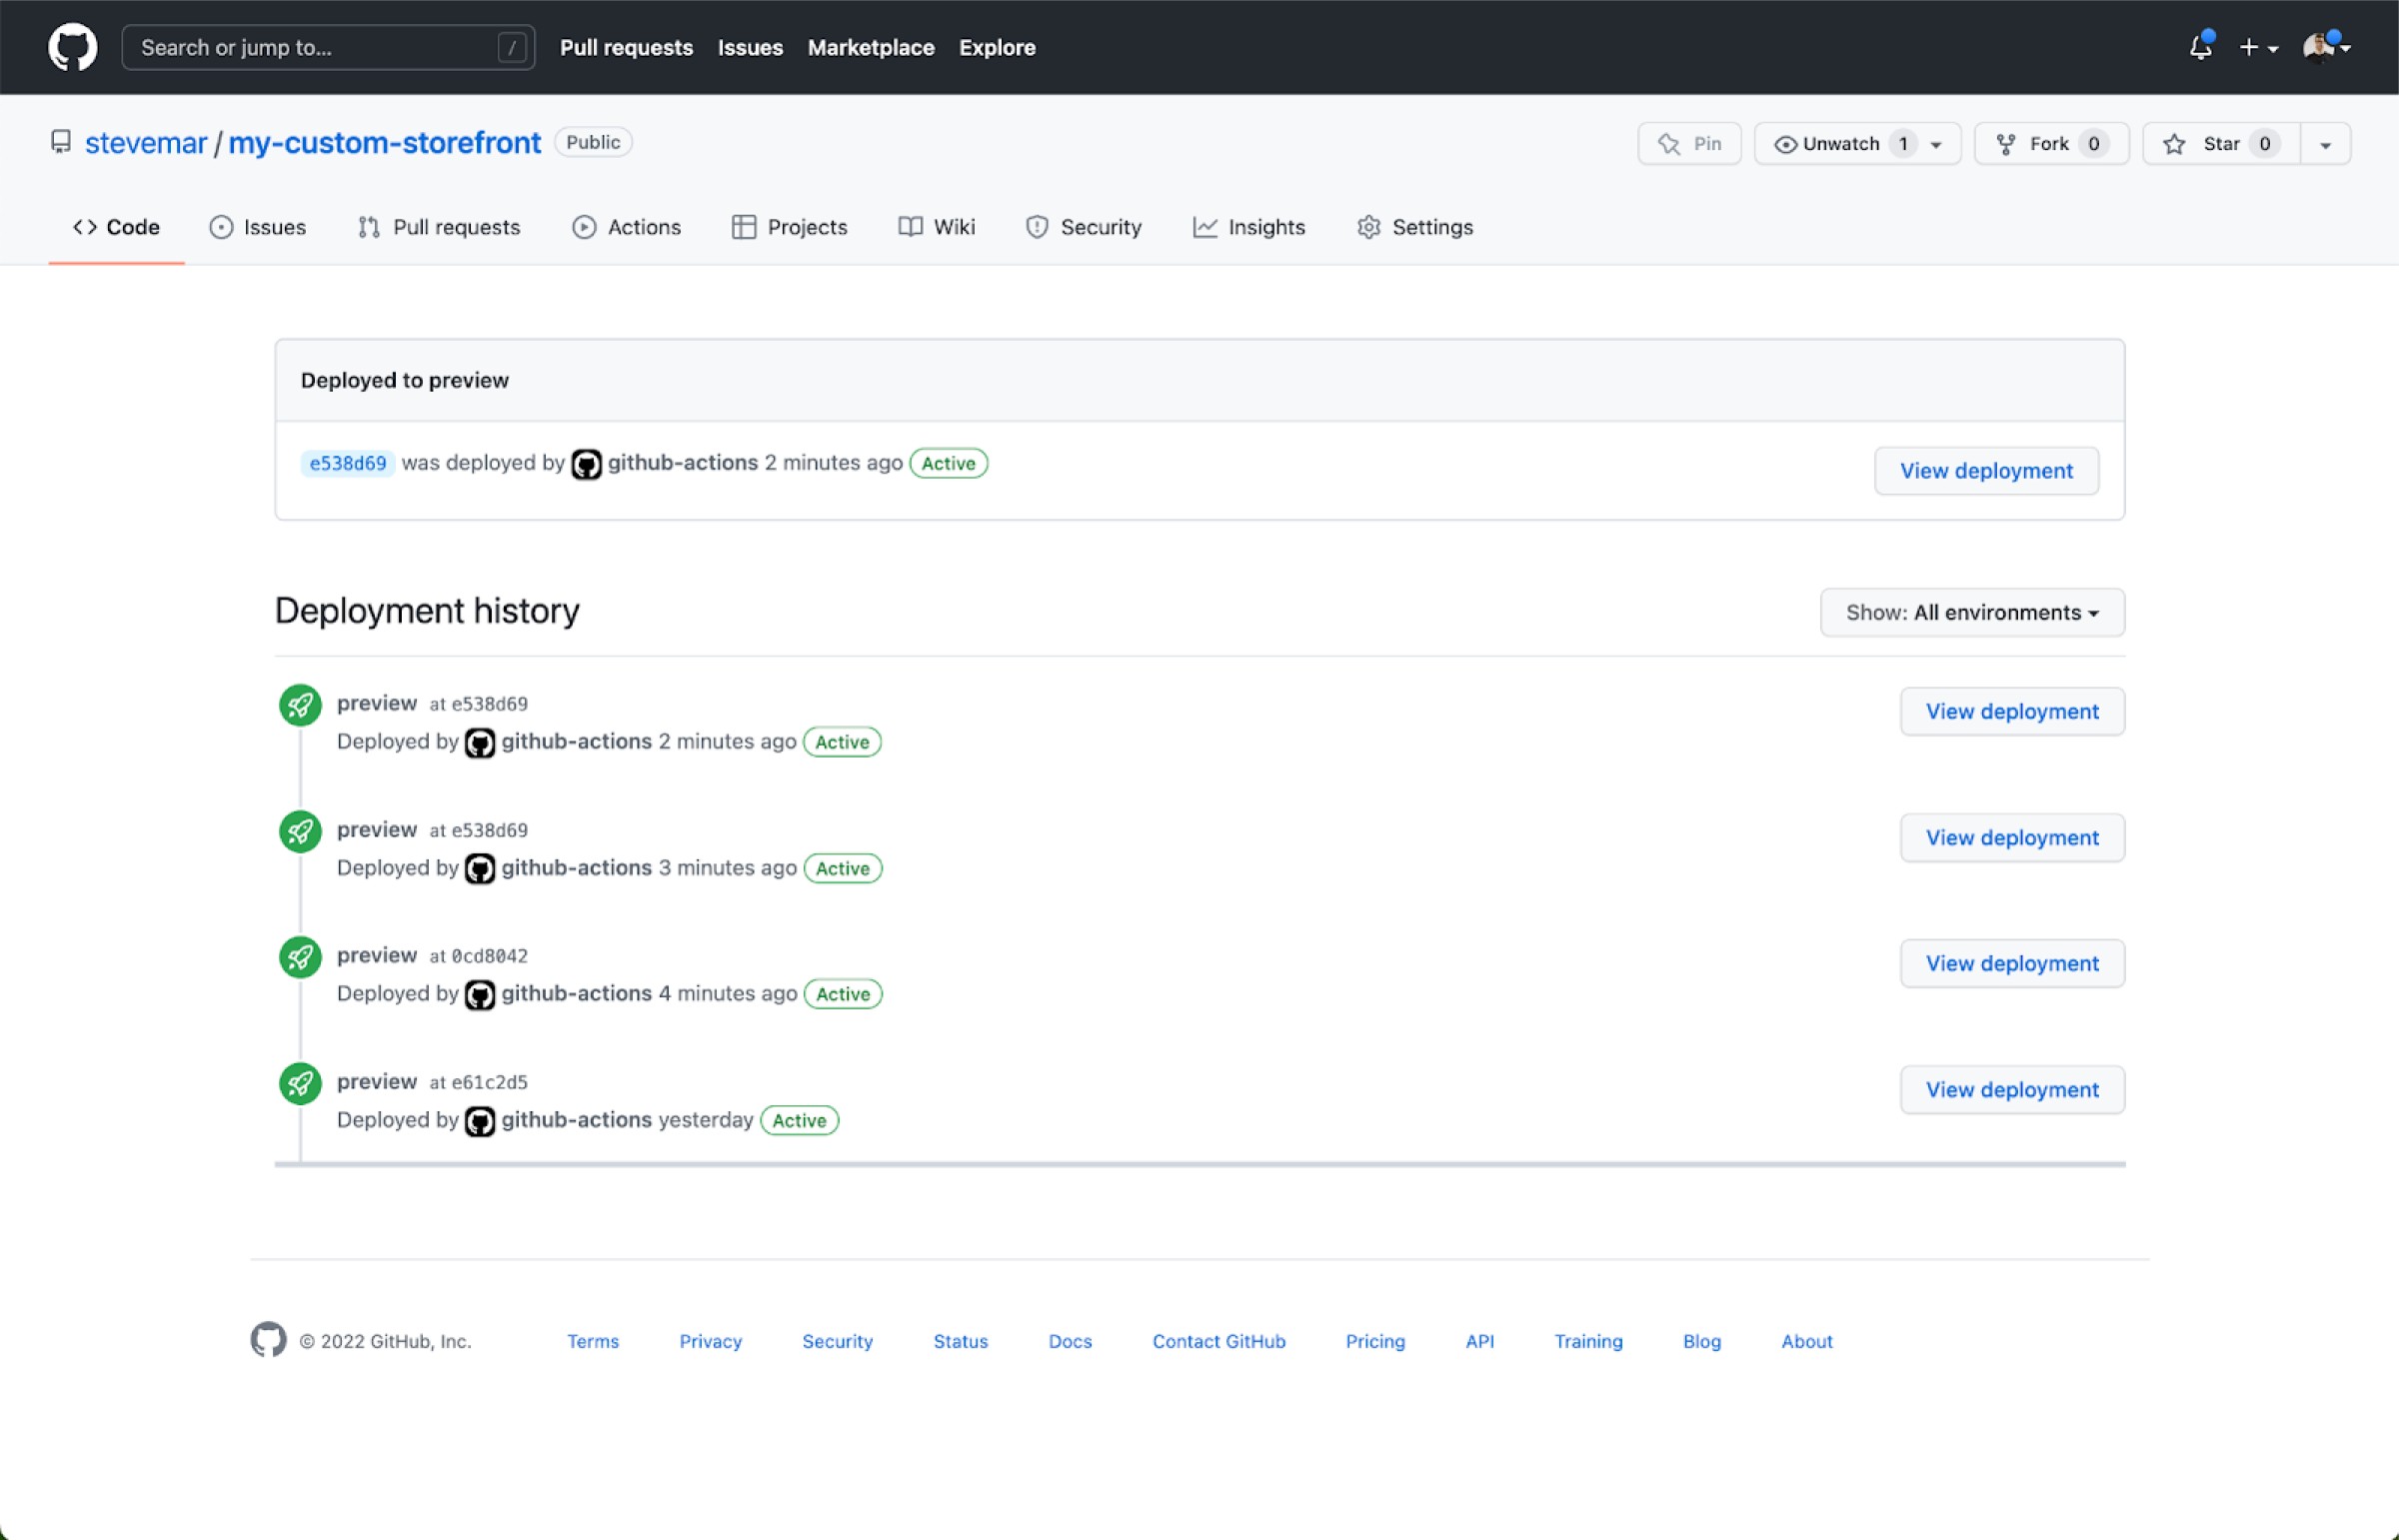 Deployments as seen in the GitHub repo